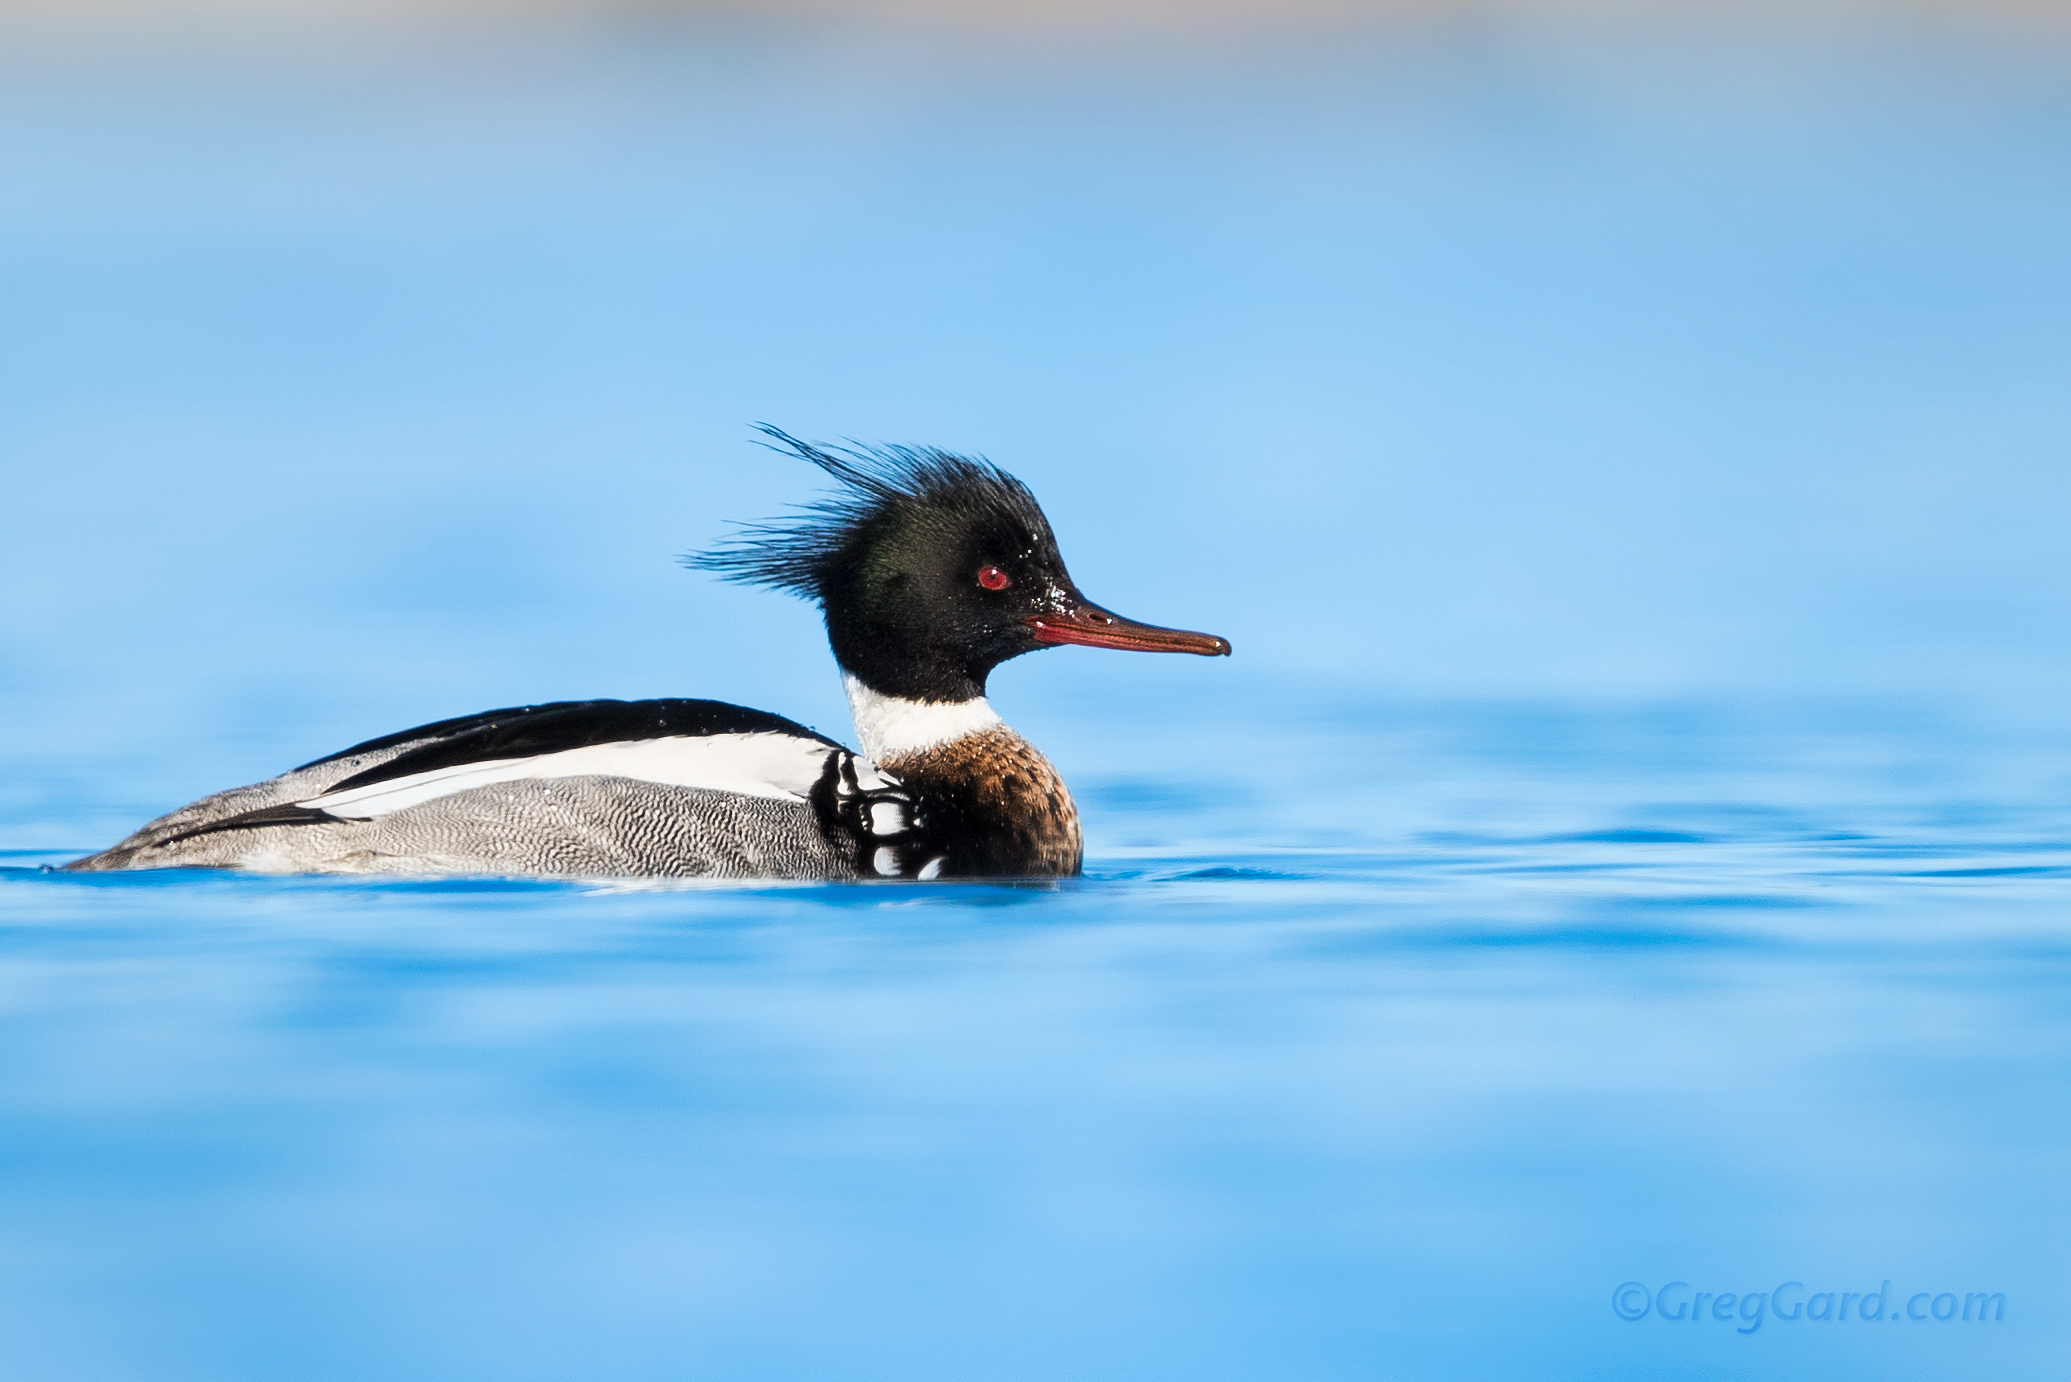  Adult male Red-breasted Merganser, in winter plumage, swimming in a lake
Northern New Jersey

Photograph captured with a Canon EOS 1DXII camera paired with a Canon 600mm f/4 IS II lens and 2x extender, at 1200mm, using following settings: 1/1250 s, 